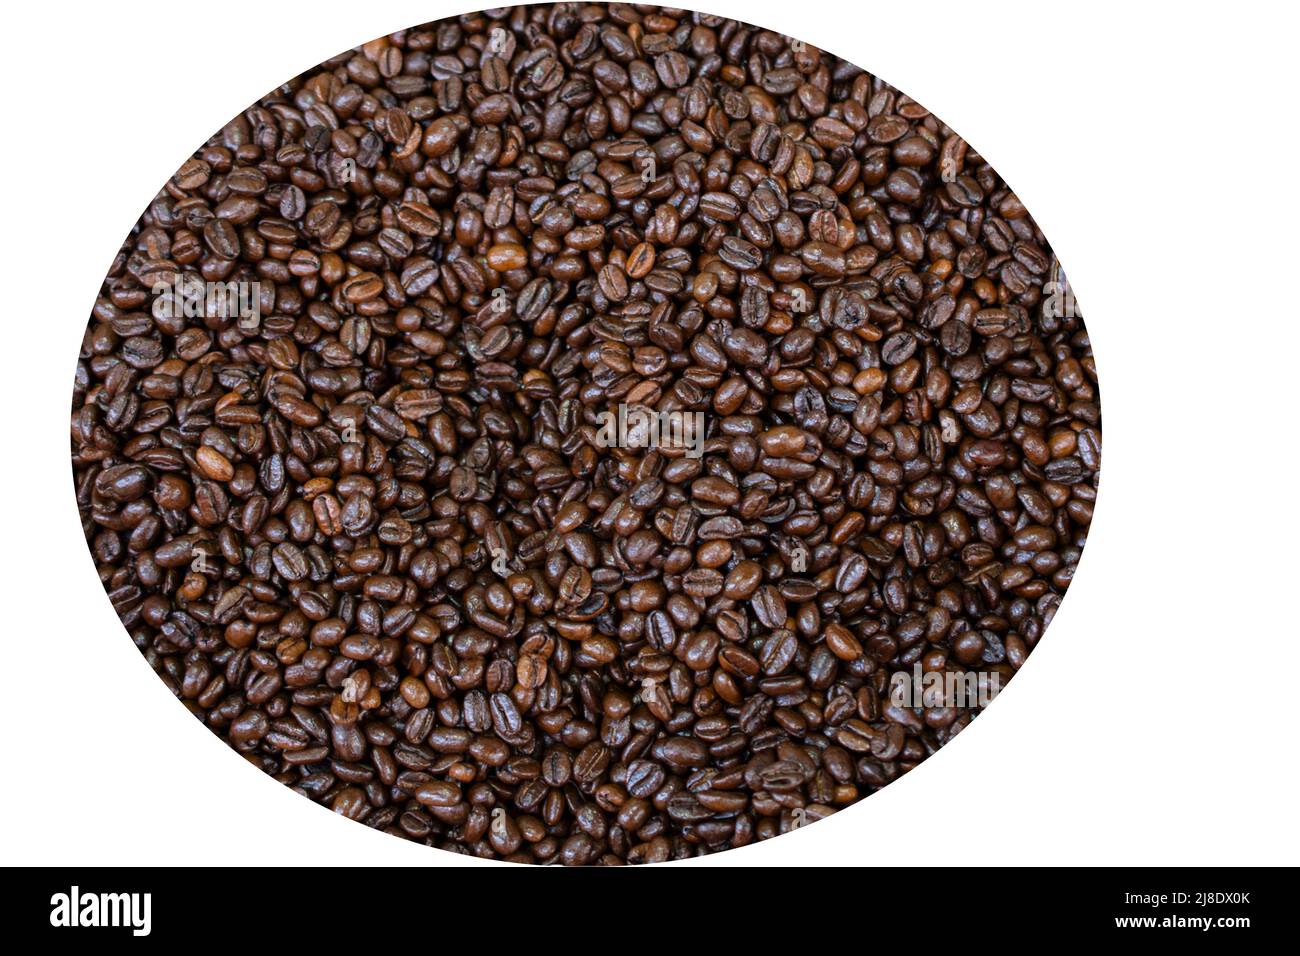 Pile of coffee beans. Coffee beans isolated on background. Love coffee concept. Stock Photo